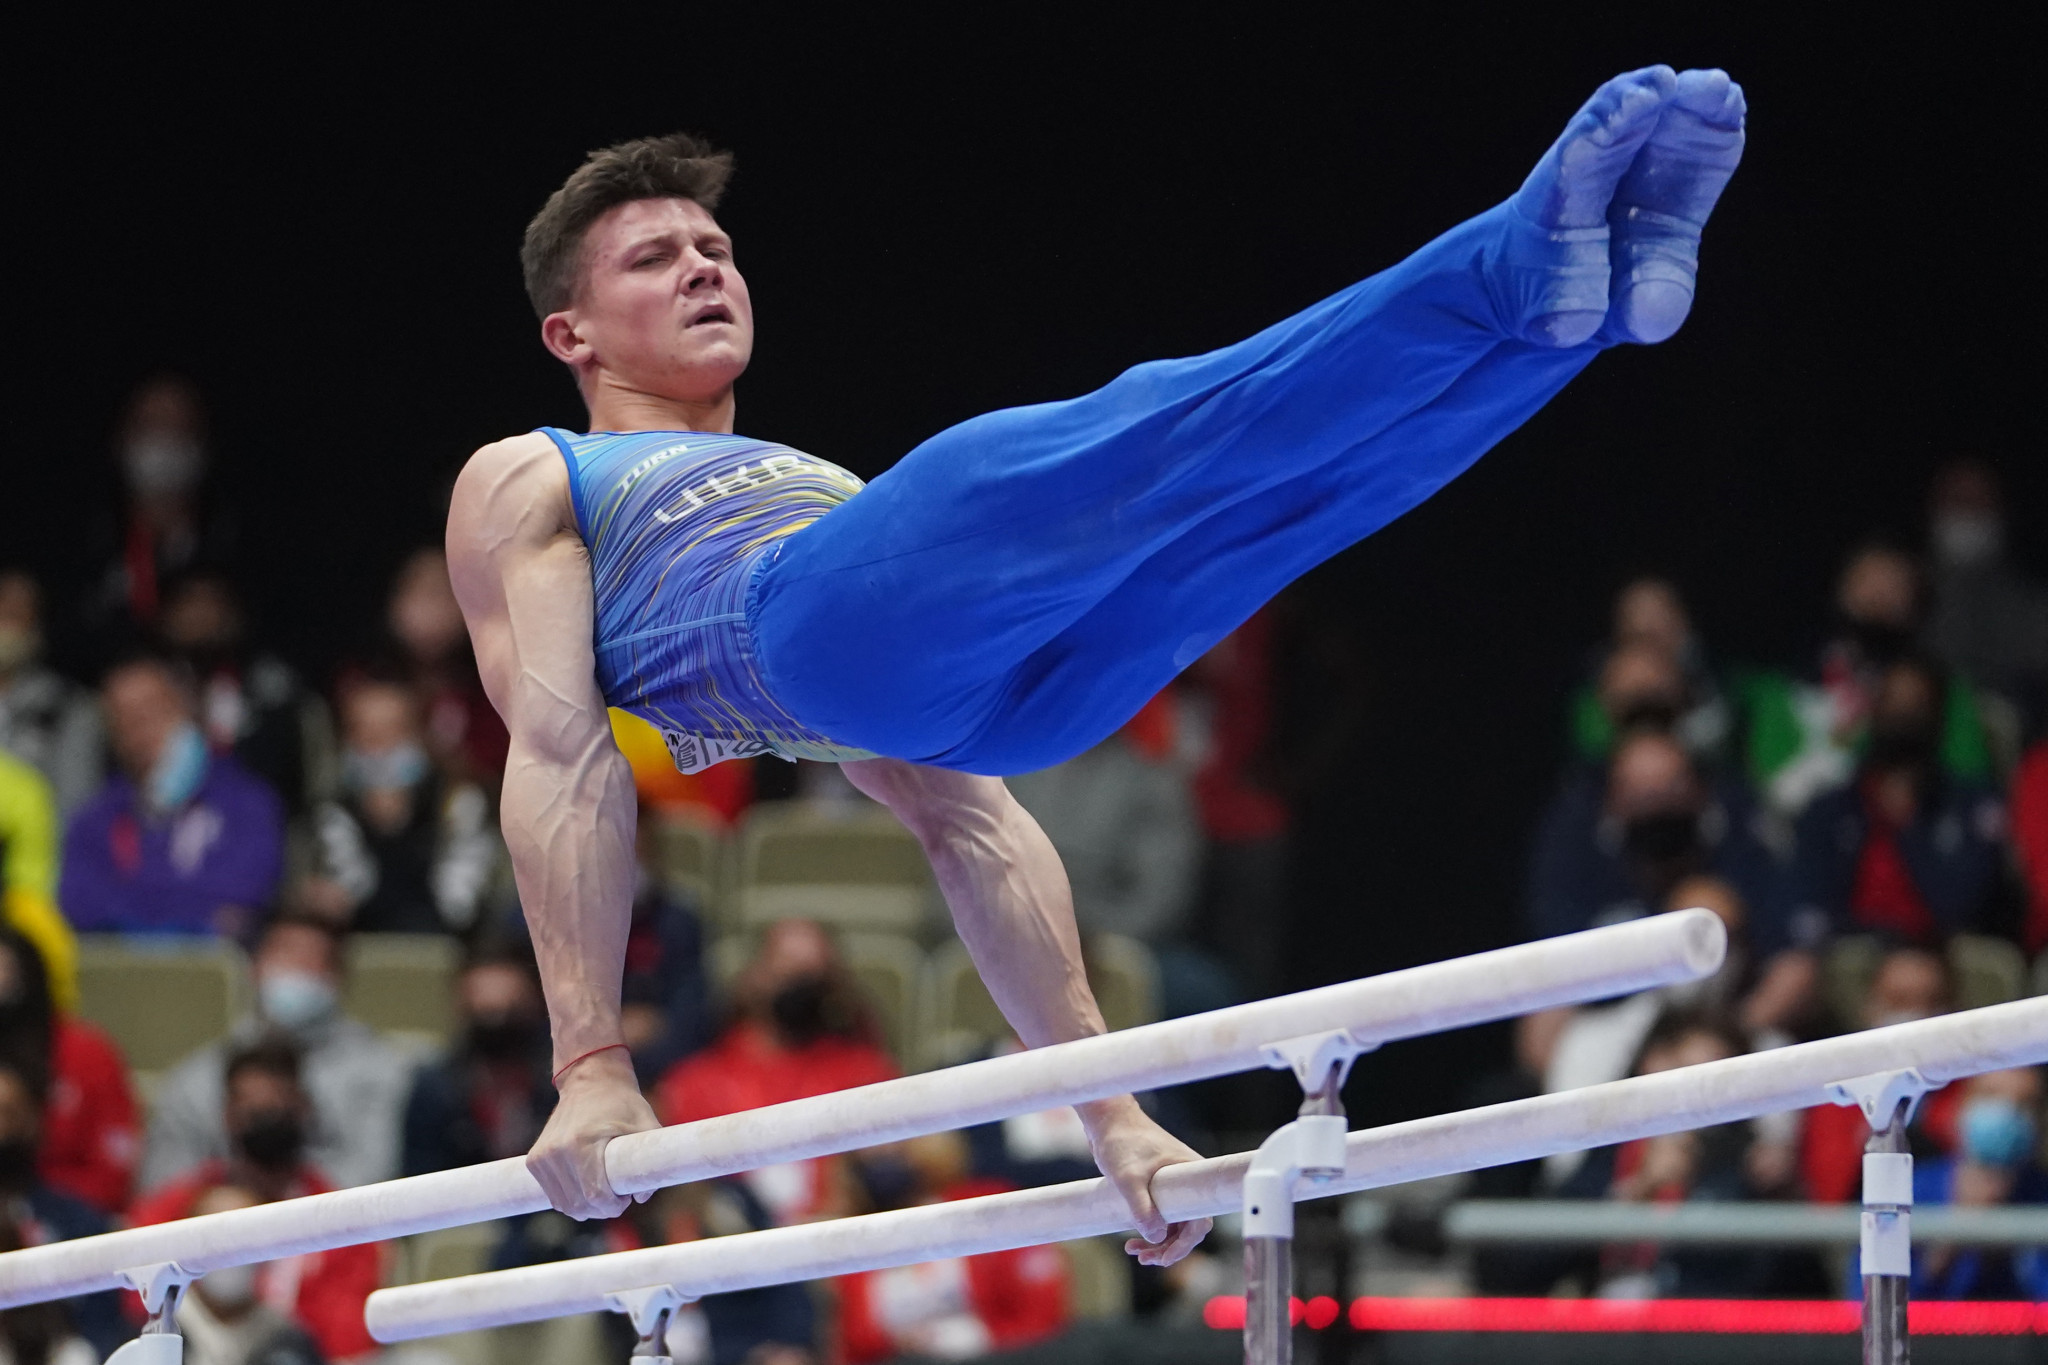 Ukraine's Illia Kovtun is set to feature on the start list for the Artistic Gymnastics Apparatus World Cup in Cairo ©Getty Images